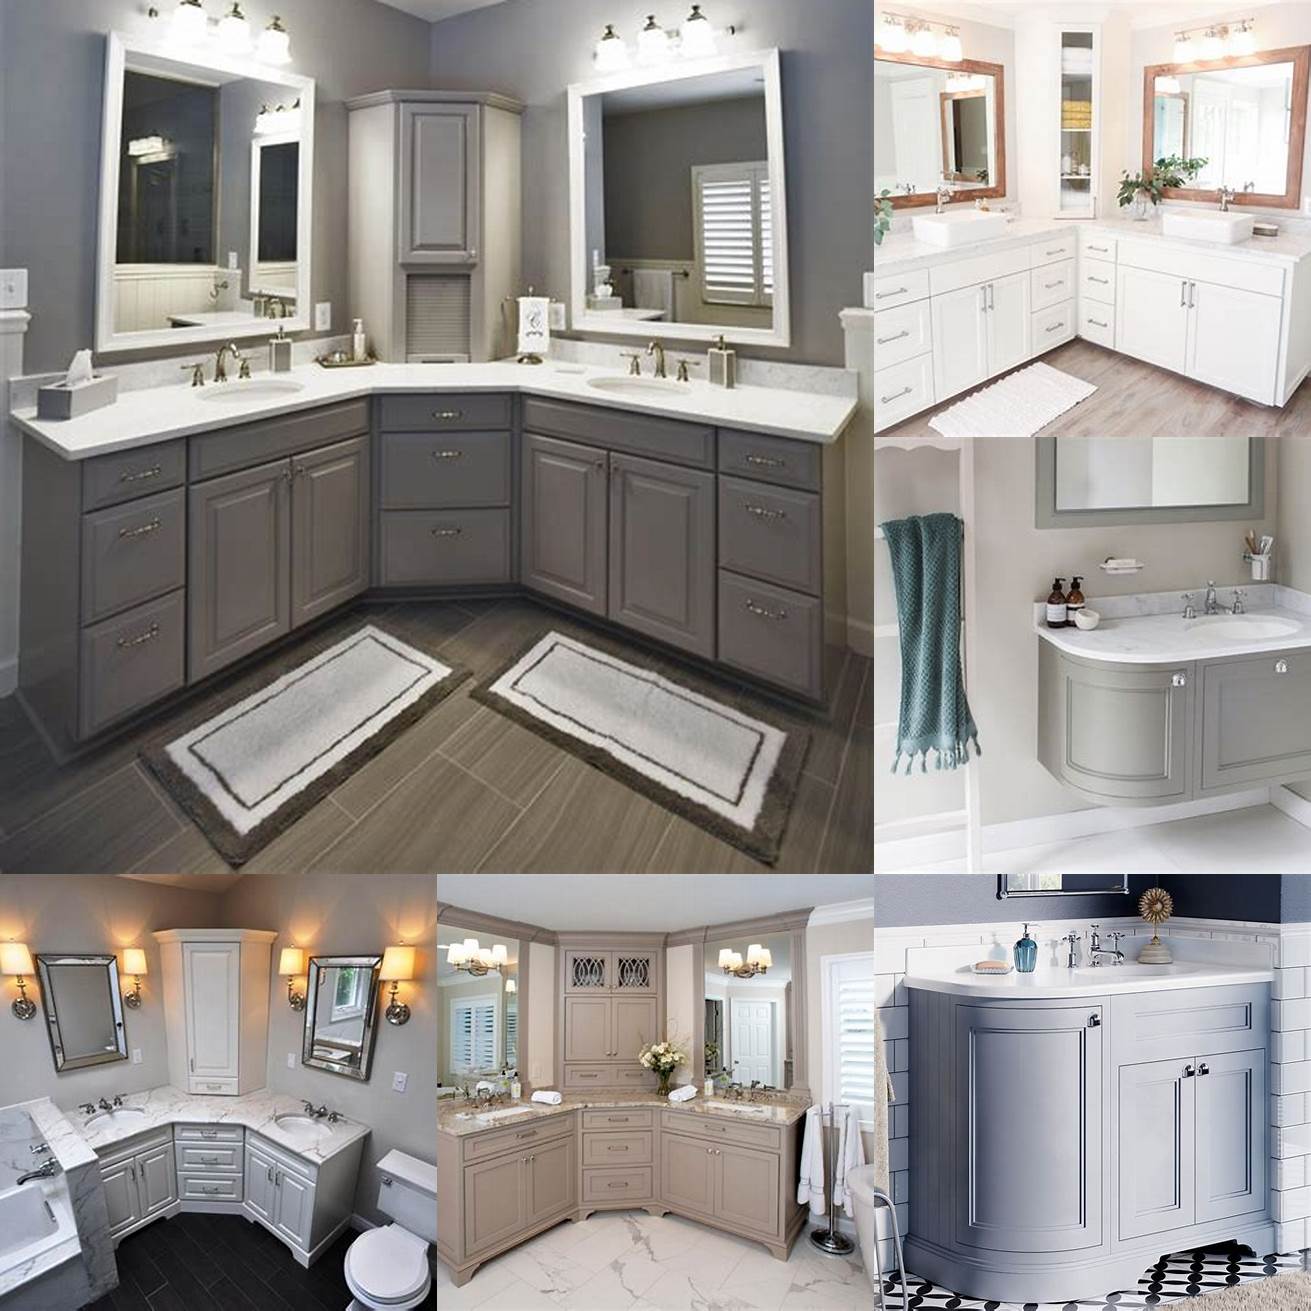 Configuration Decide whether you want a freestanding wall-mounted or corner double vanity depending on your bathrooms layout and plumbing